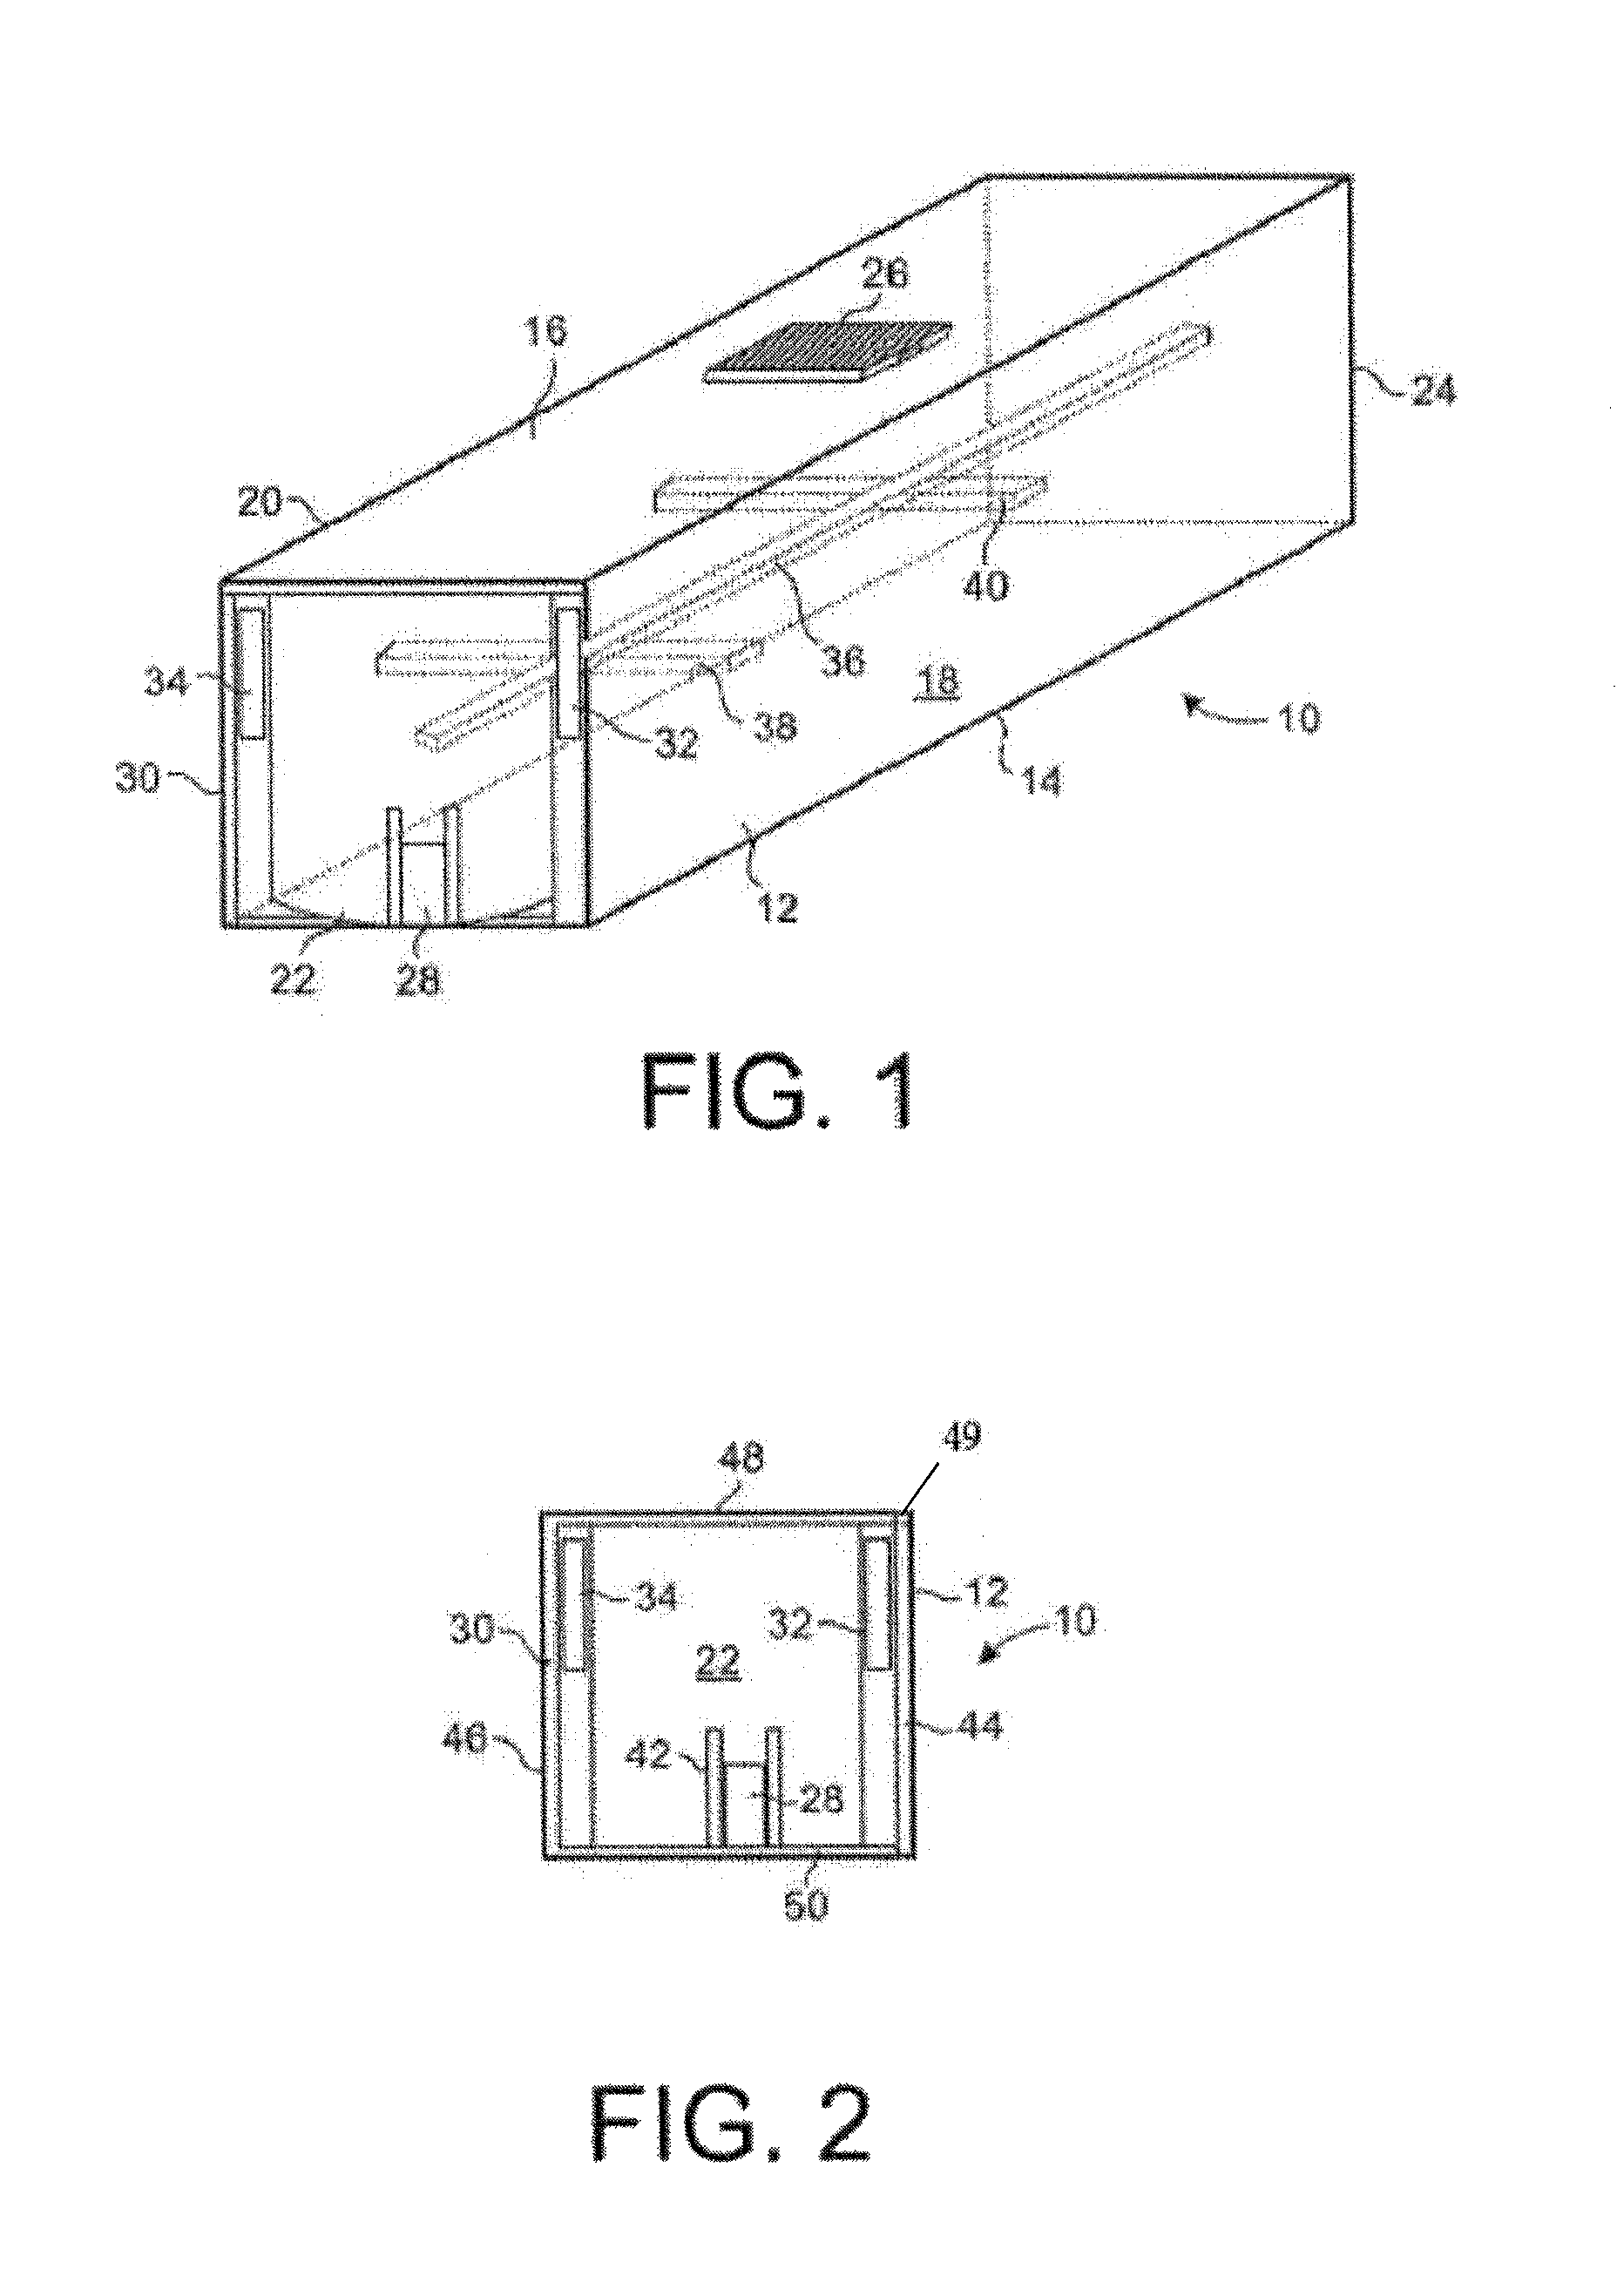 Methods of storing and moving proppant at location adjacent rail line